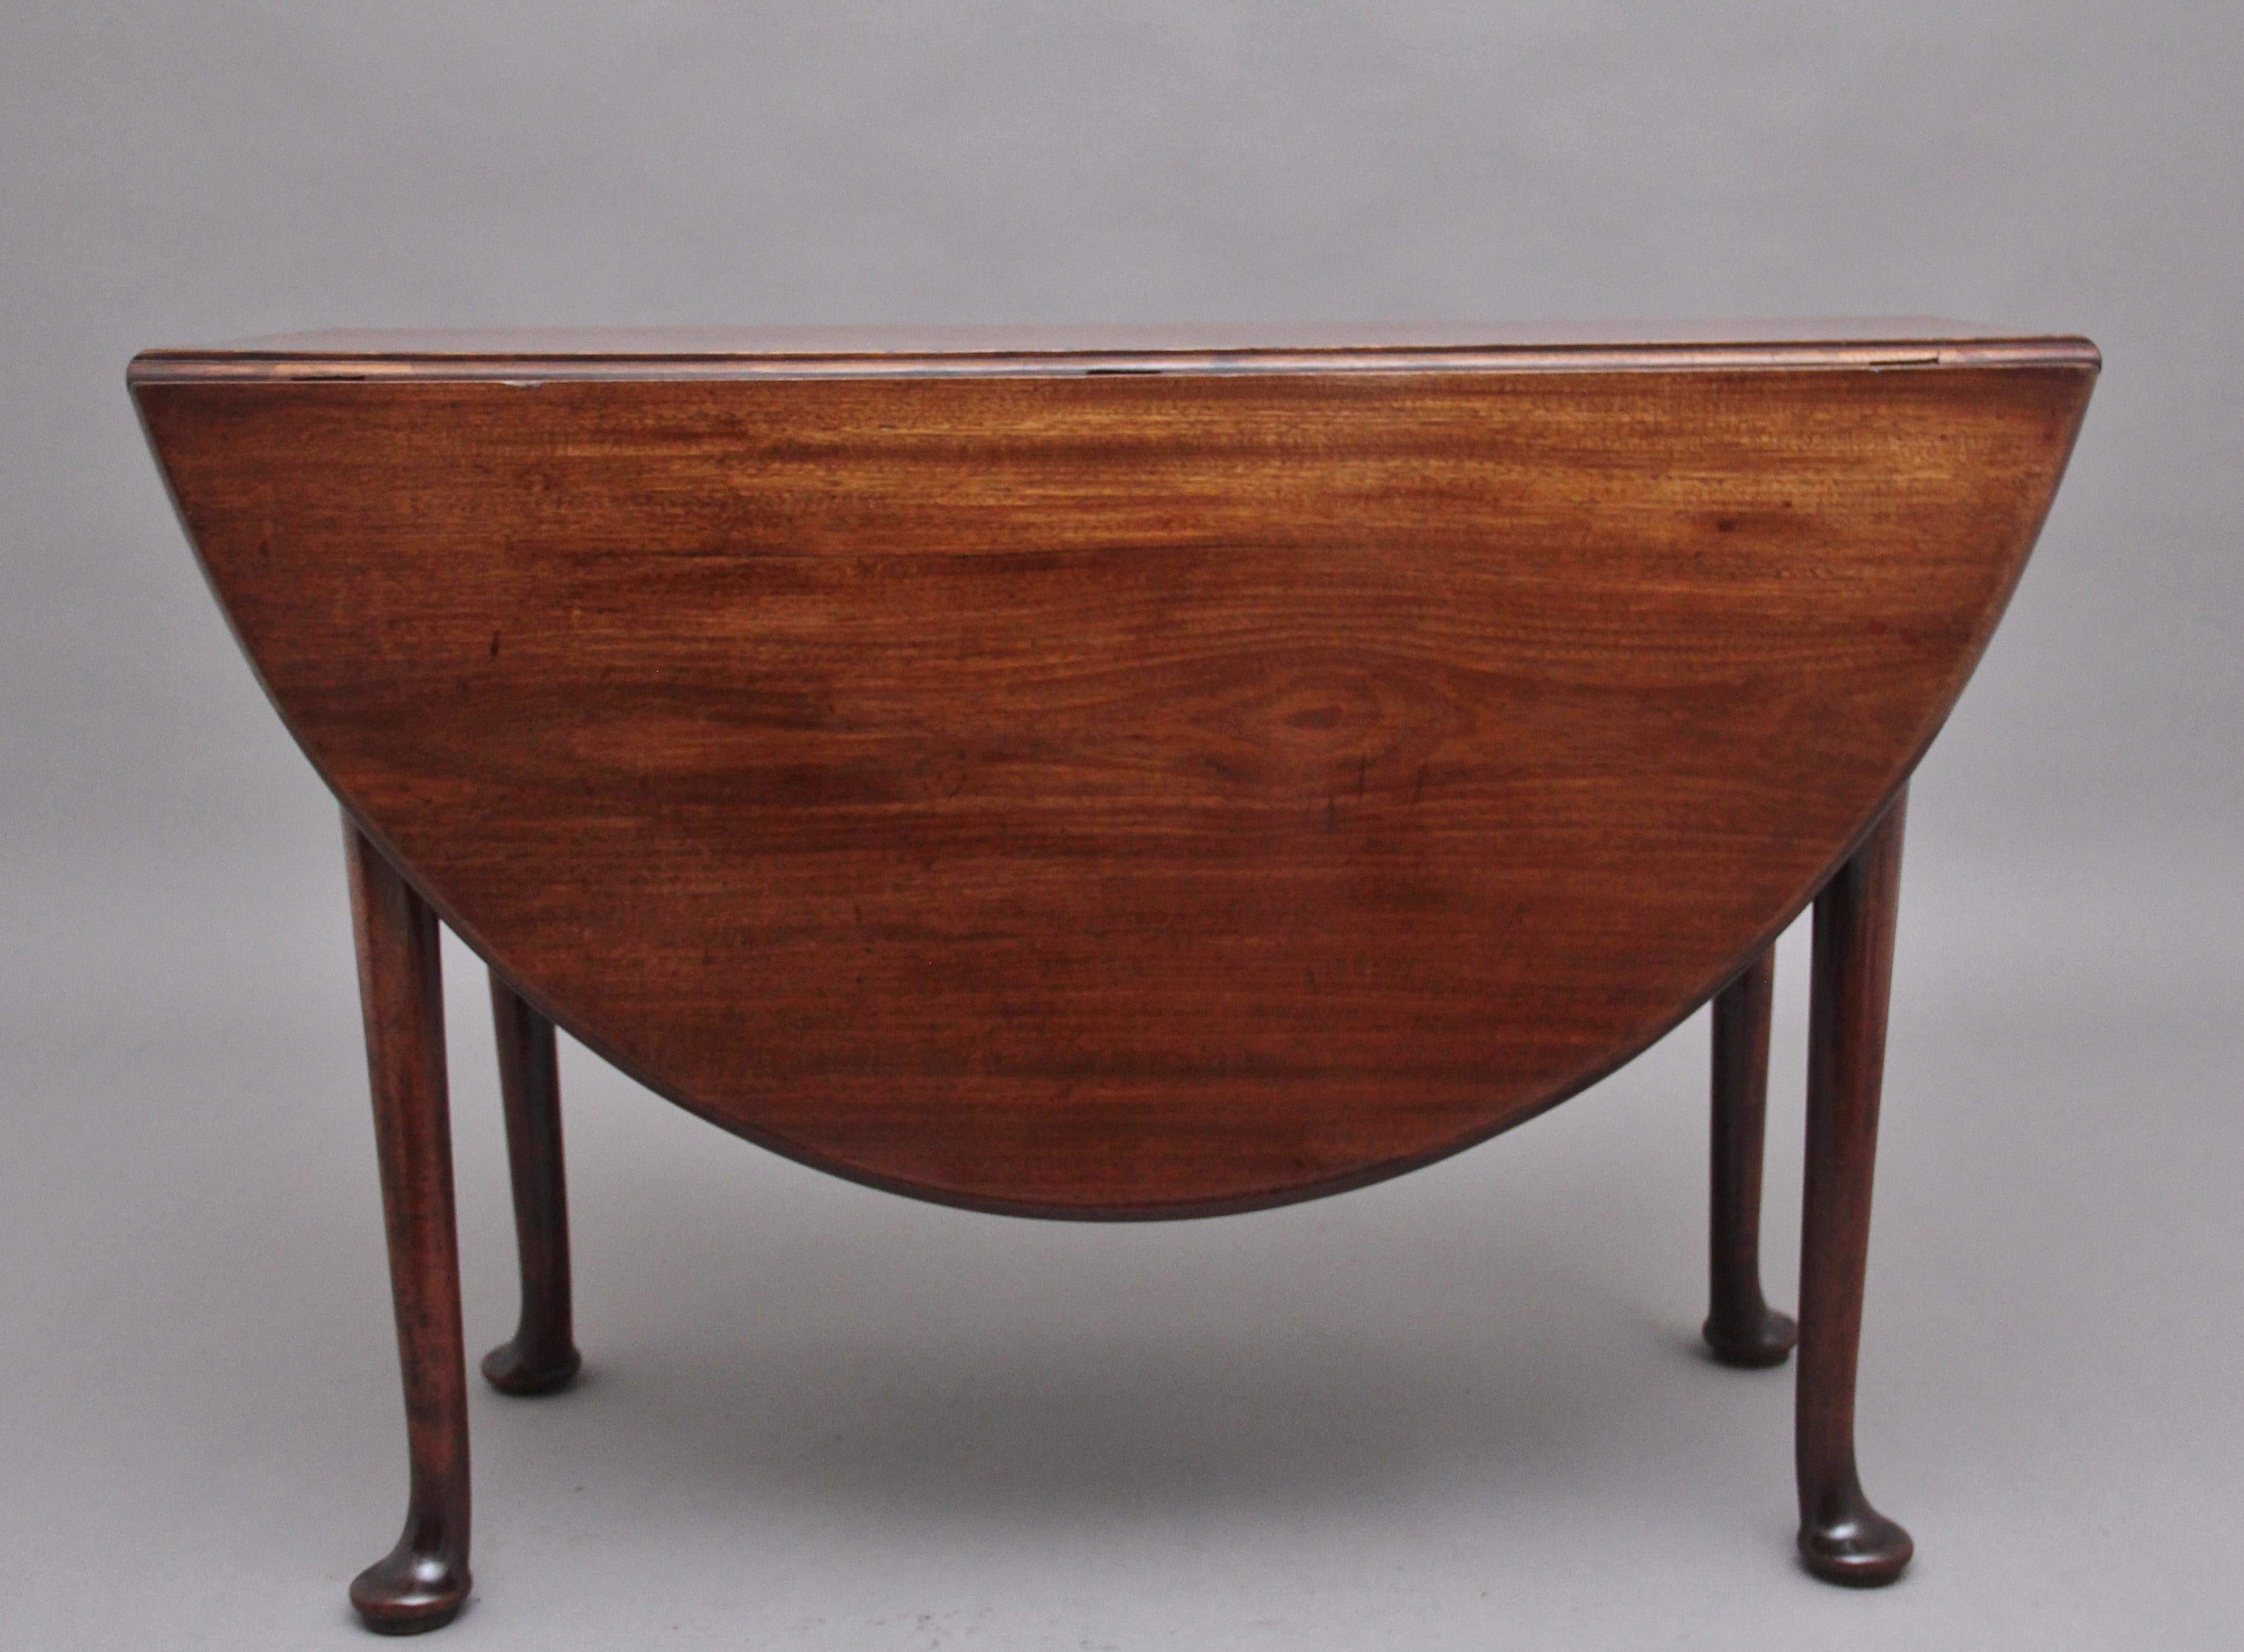 18th Century Georgian mahogany drop leaf table, having a lovely figured solid top, once the leaves are fully extended the top is oval in shape, standing on turned legs with pad feet, having a lovely warm rich mahogany colour and in excellent